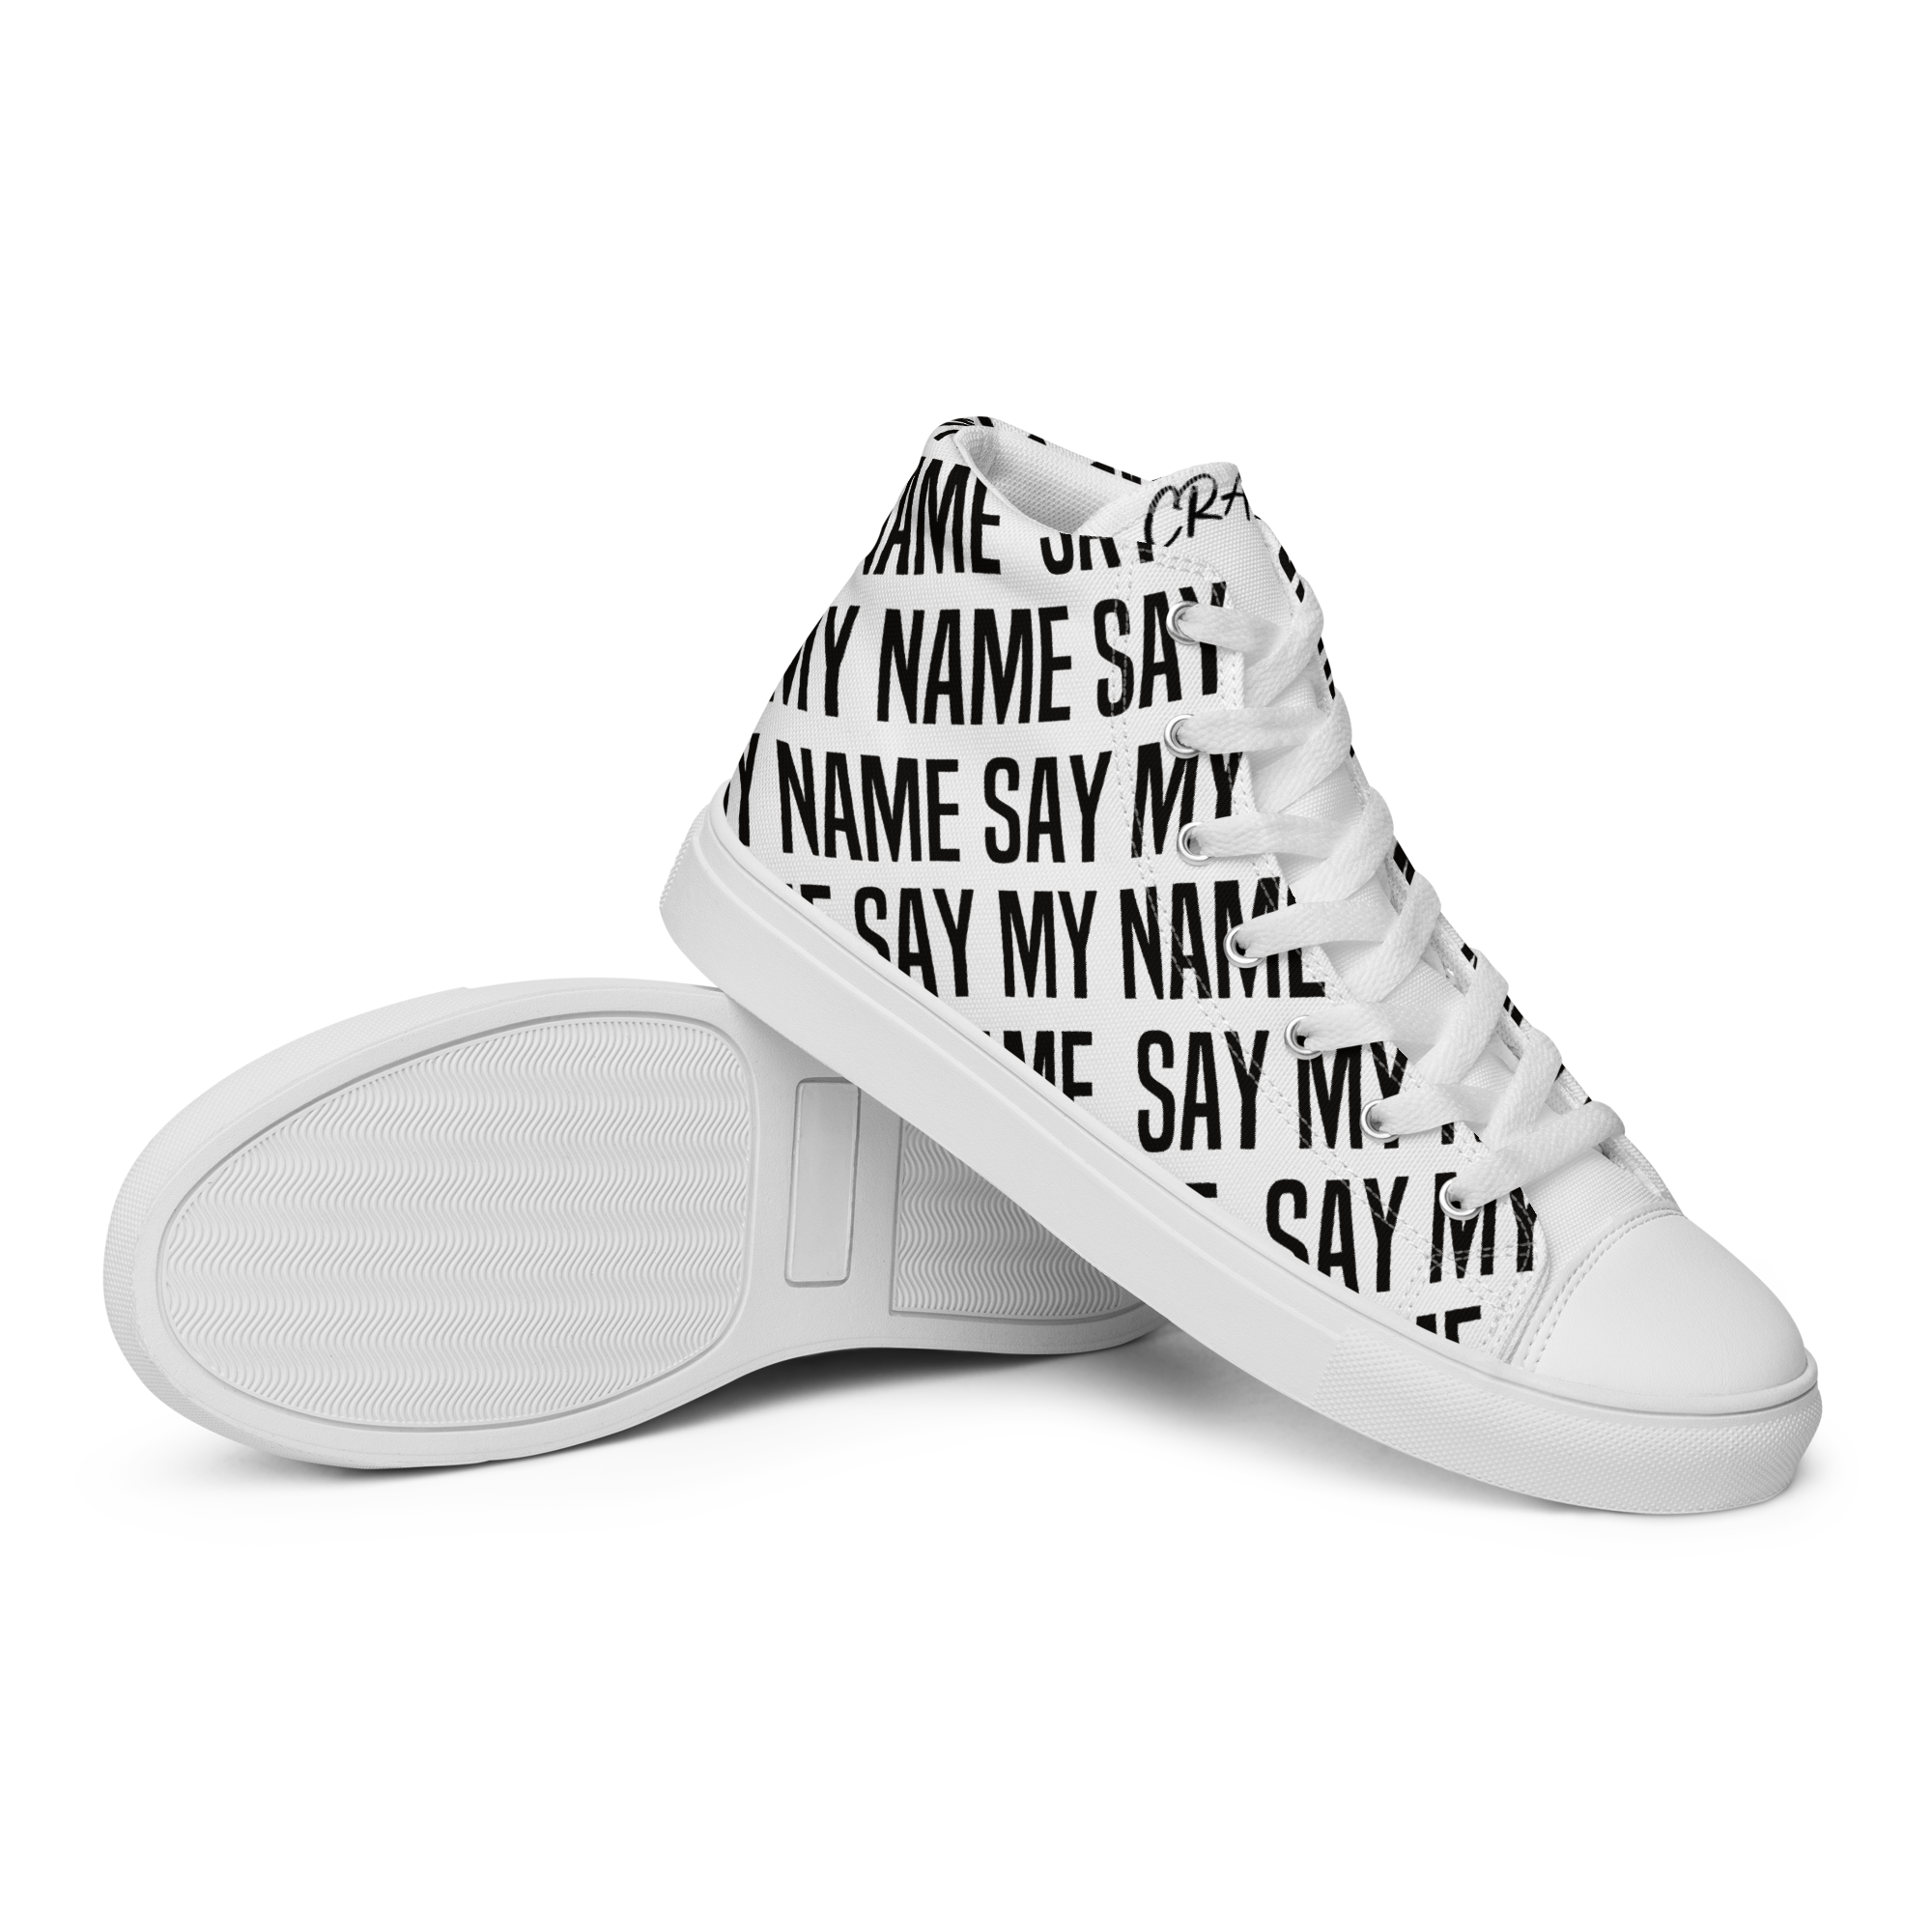 Baskets hautes blanches en toile femme "SAY MY NAME" Multi